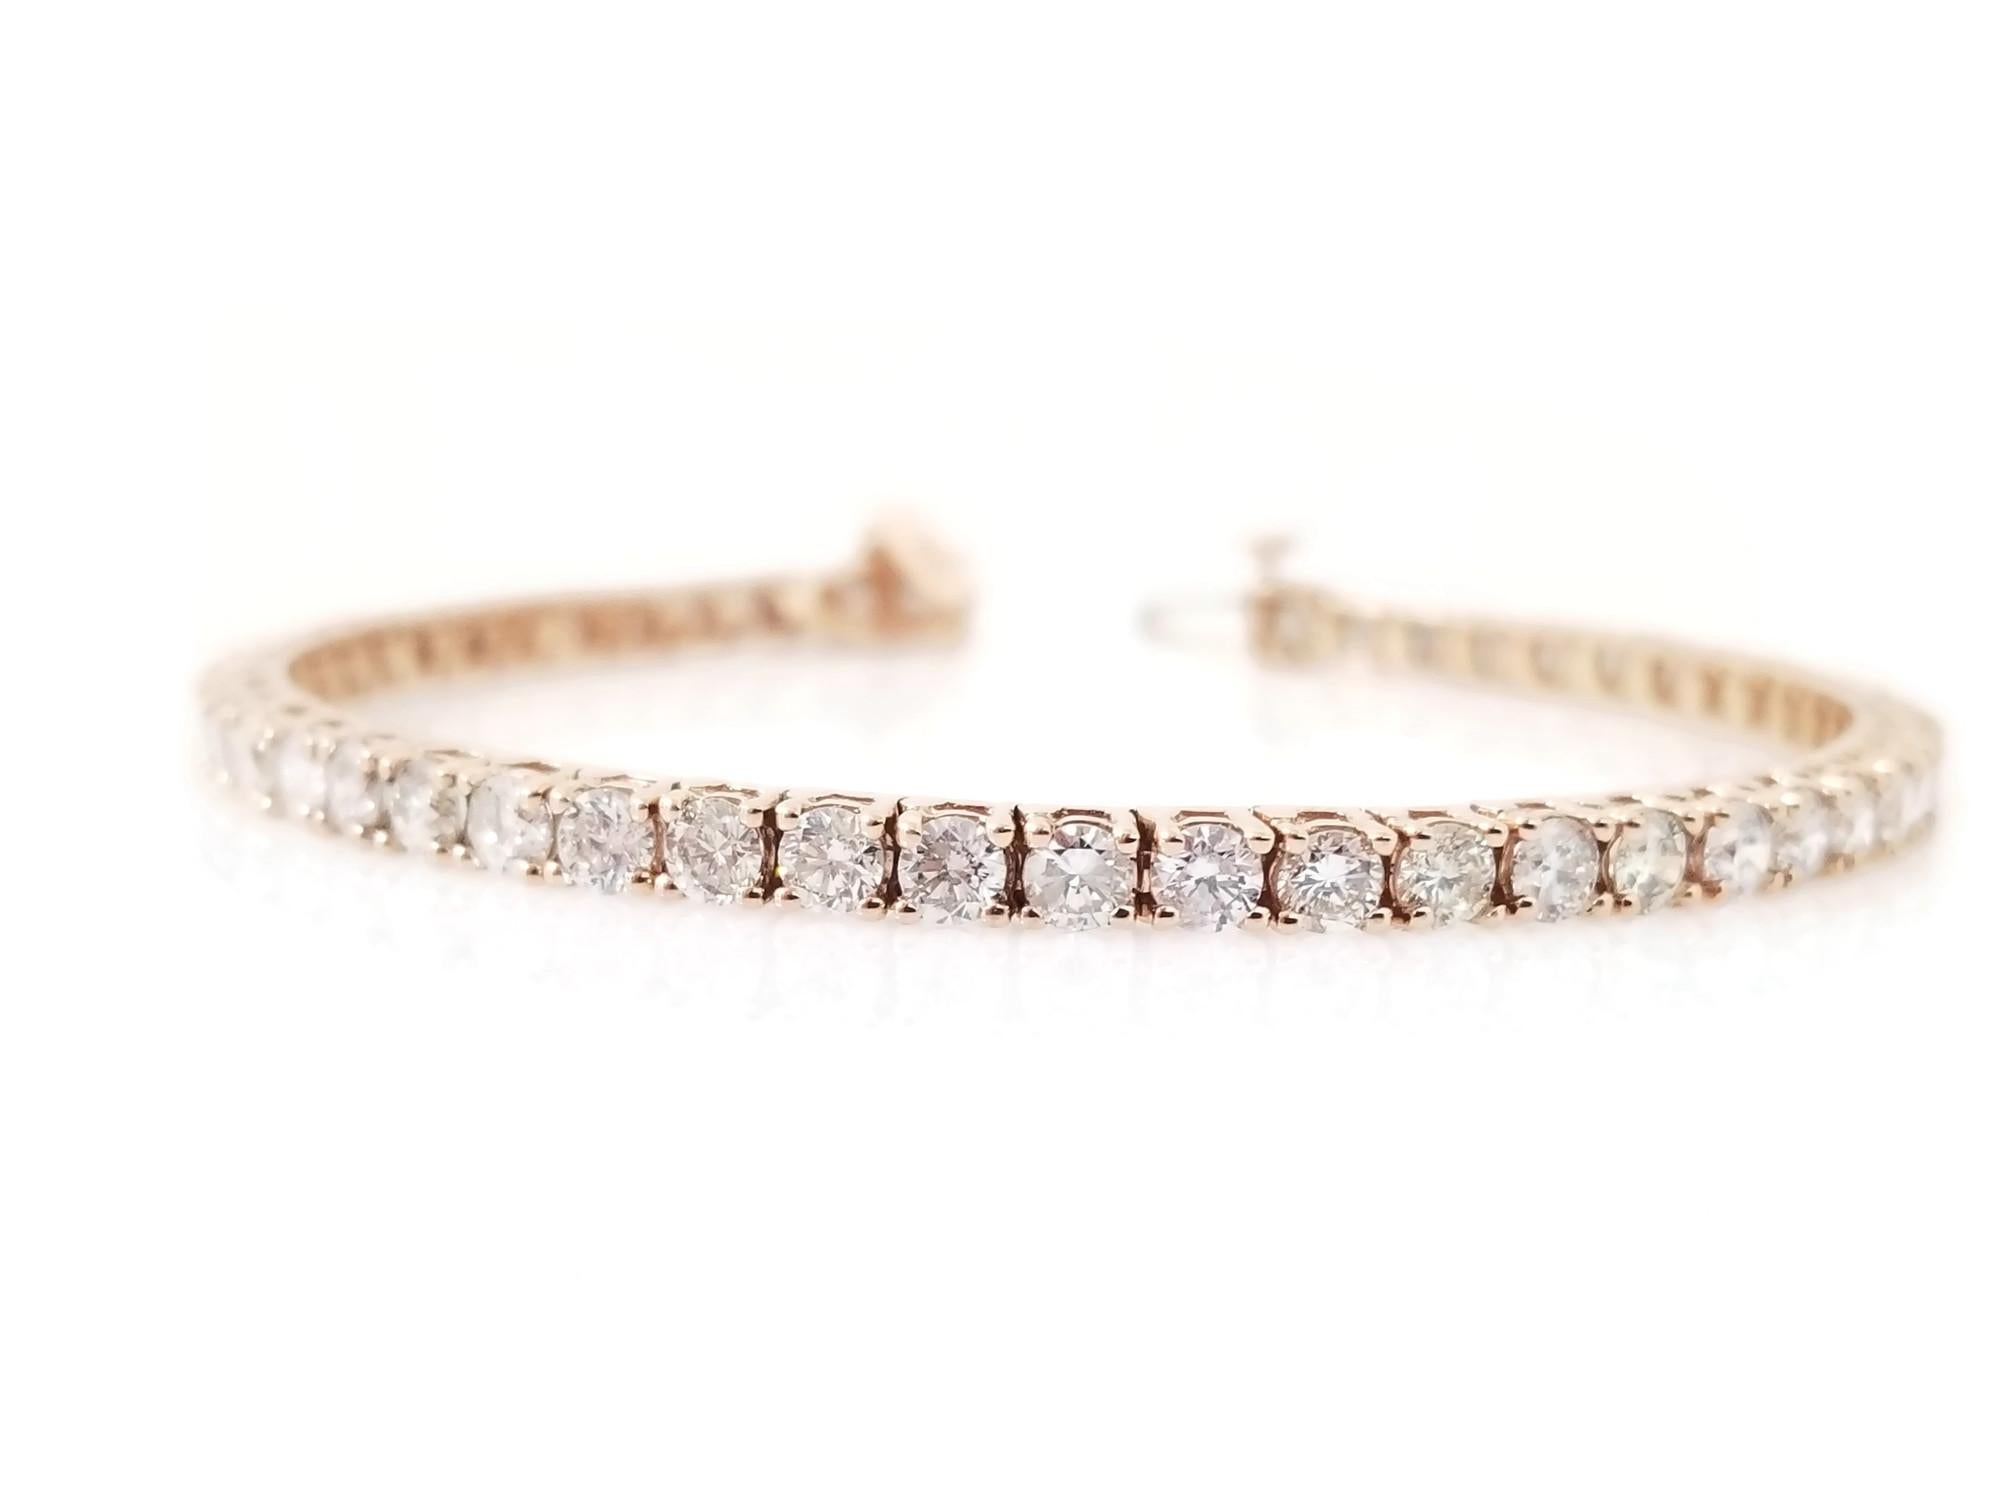 Quality tennis bracelet, natural round-brilliant cut white diamonds clean and Excellent shine. 14k Rose gold classic four-prong style for maximum light brilliance.
 
Length 7 Inch
Average Color H
Average Clarity SI 
Size 3.8 mm Wide